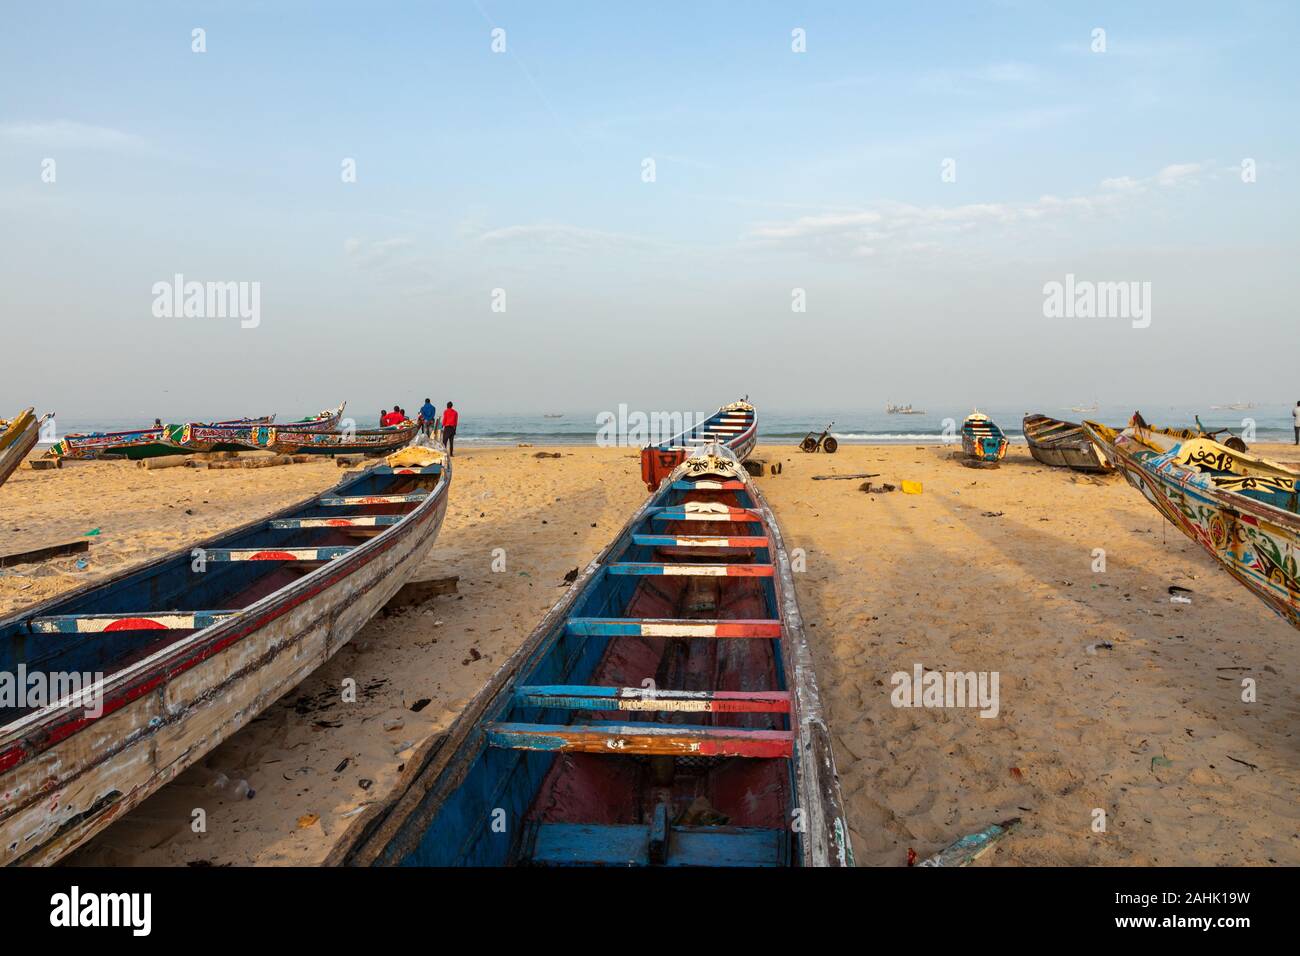 Traditional painted wooden fishing boat in Kayar, Senegal. West Africa. Stock Photo